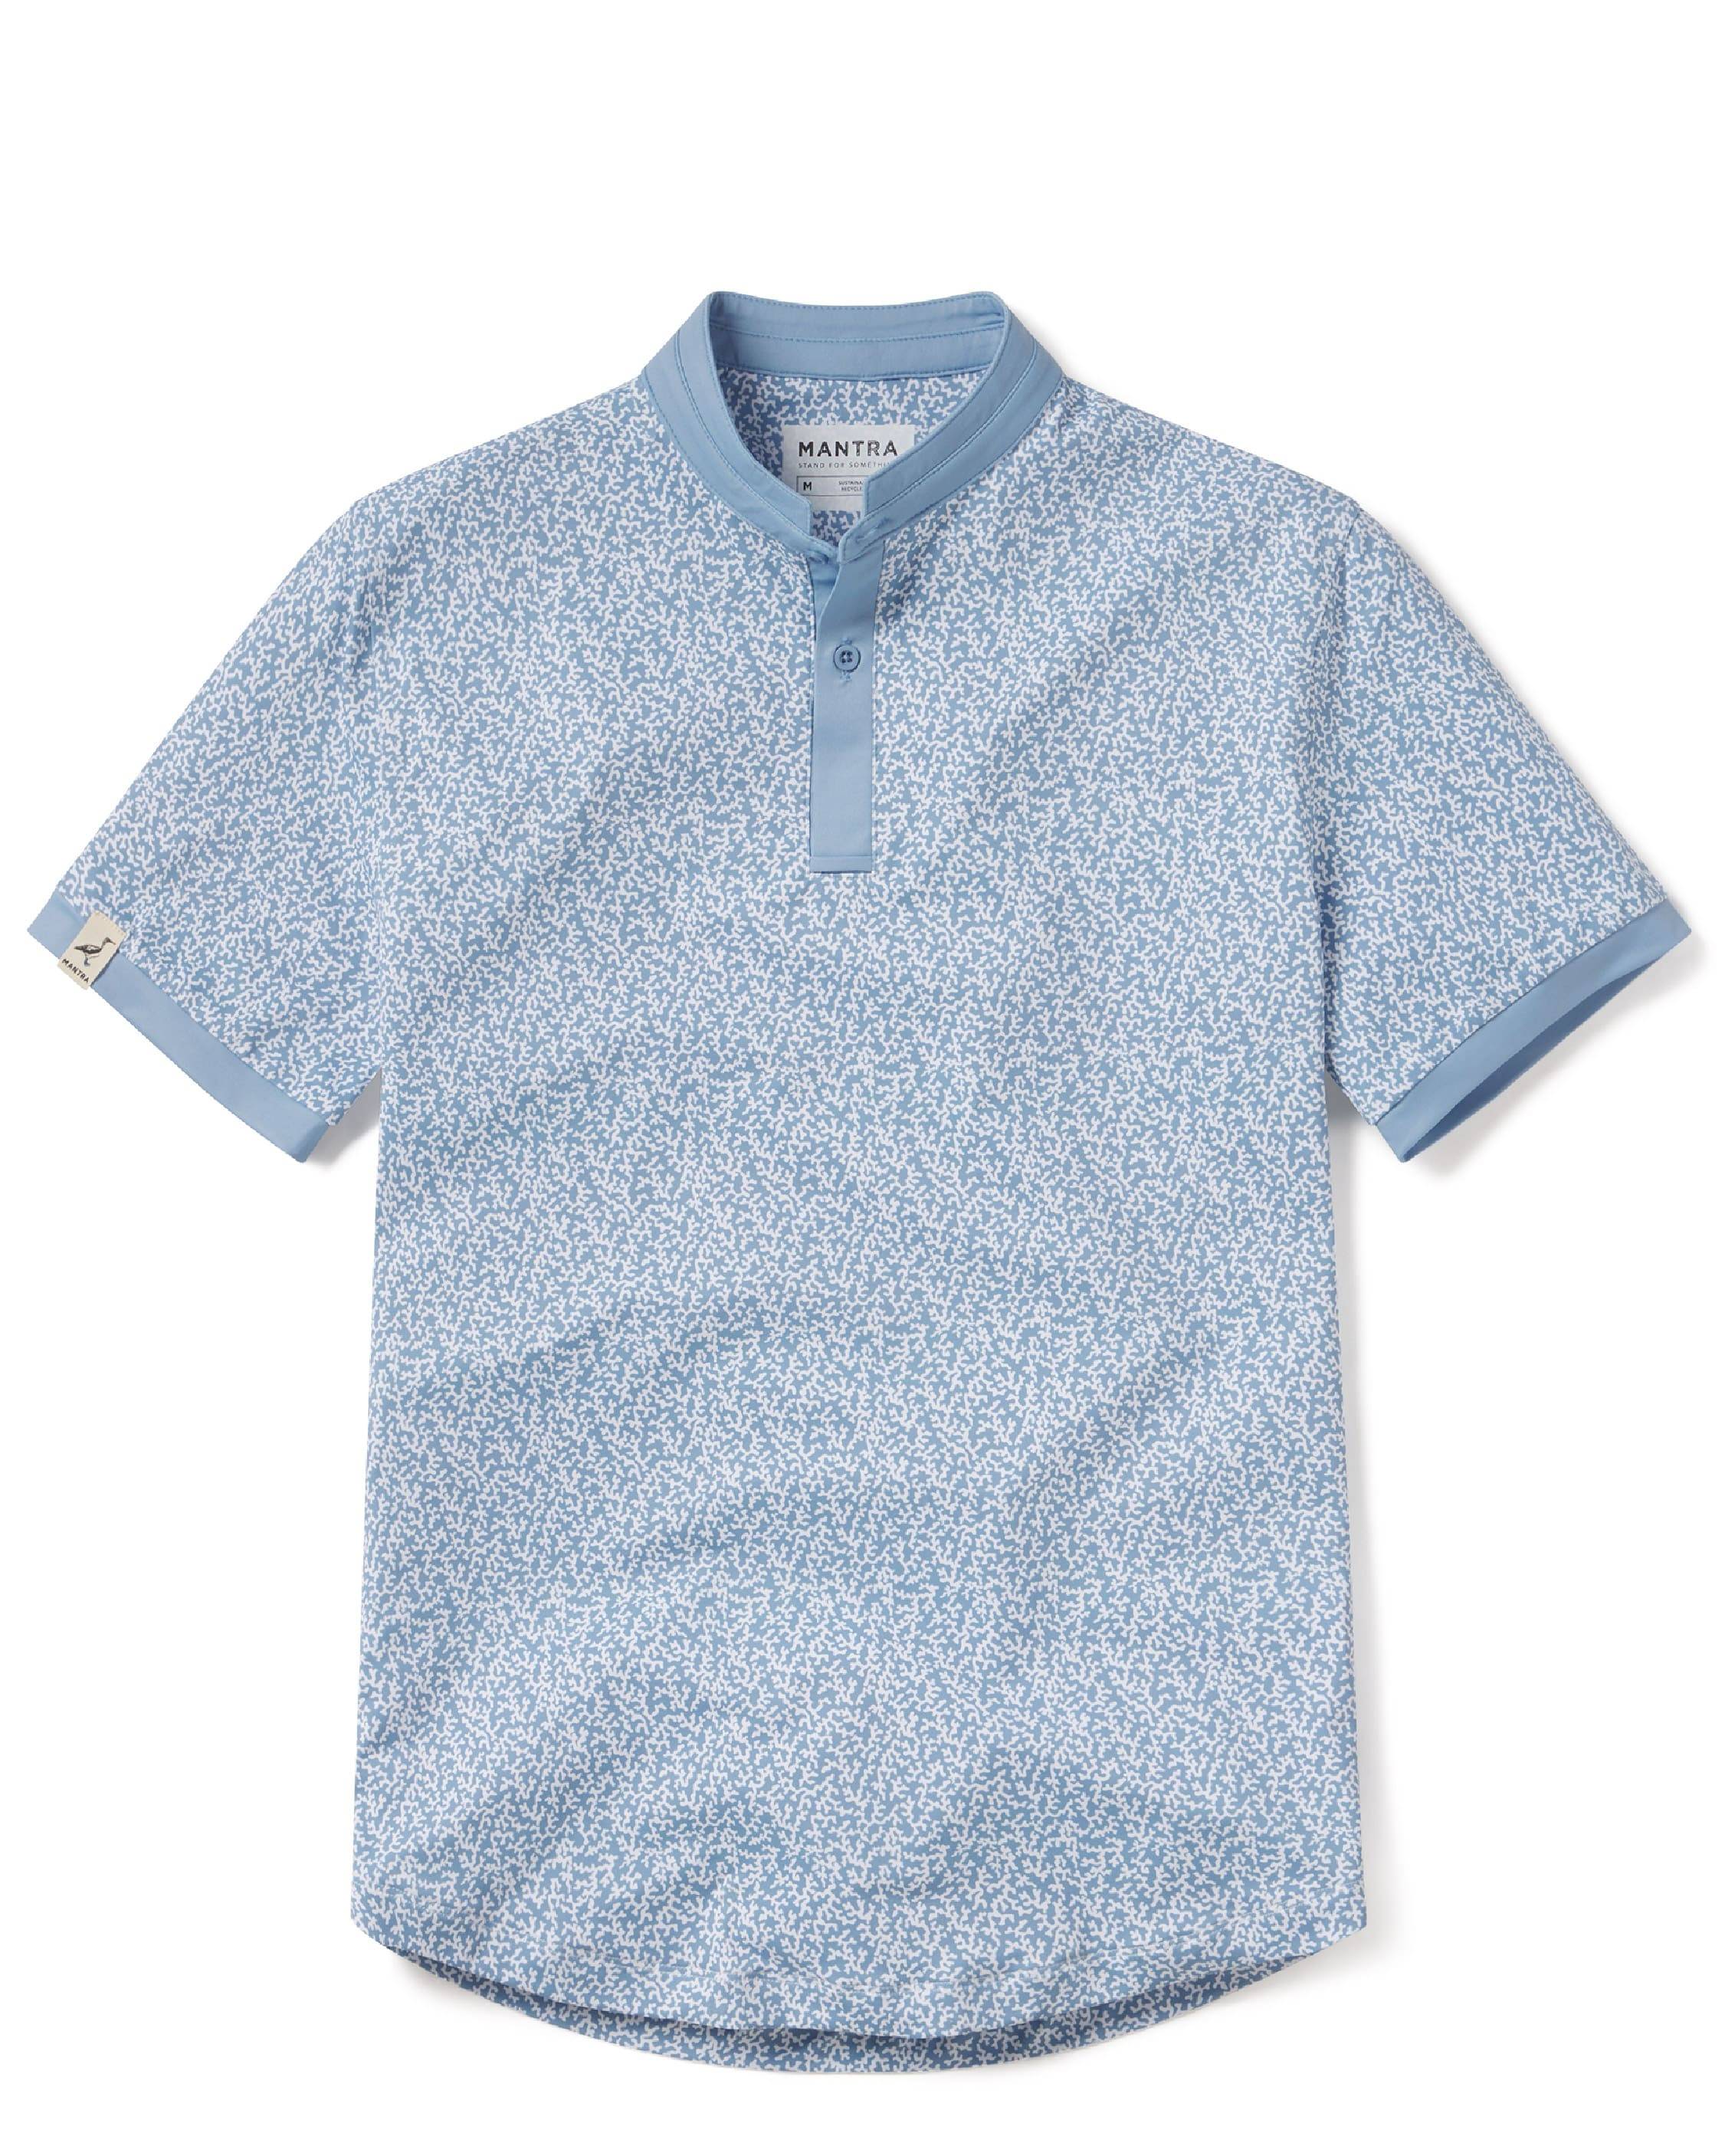 MANTRA CORAL Polo - sustainable mens performance polo made from recycled materials